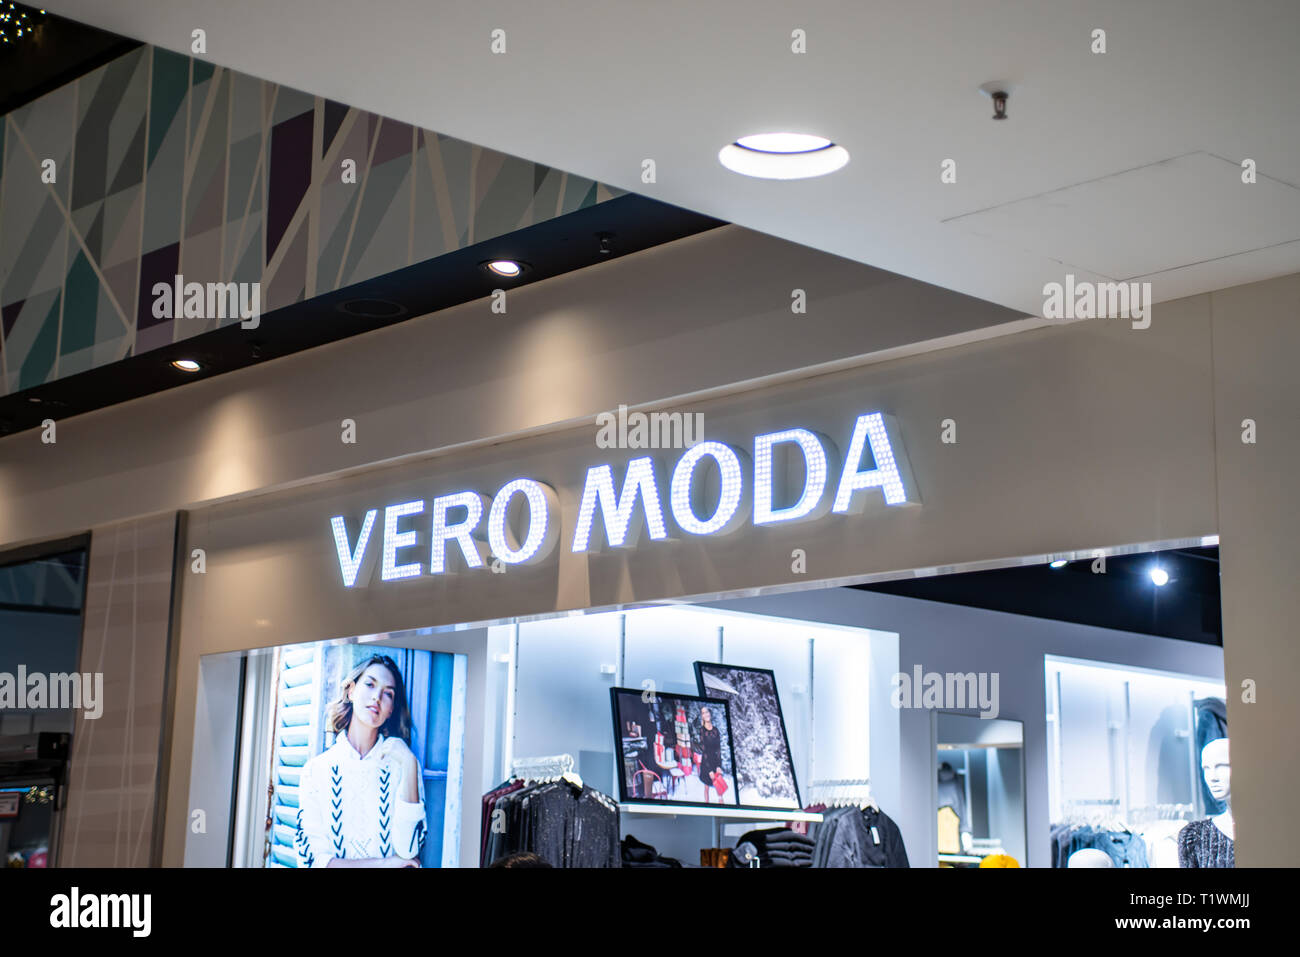 Vero Building High Resolution Stock Photography and Images - Alamy